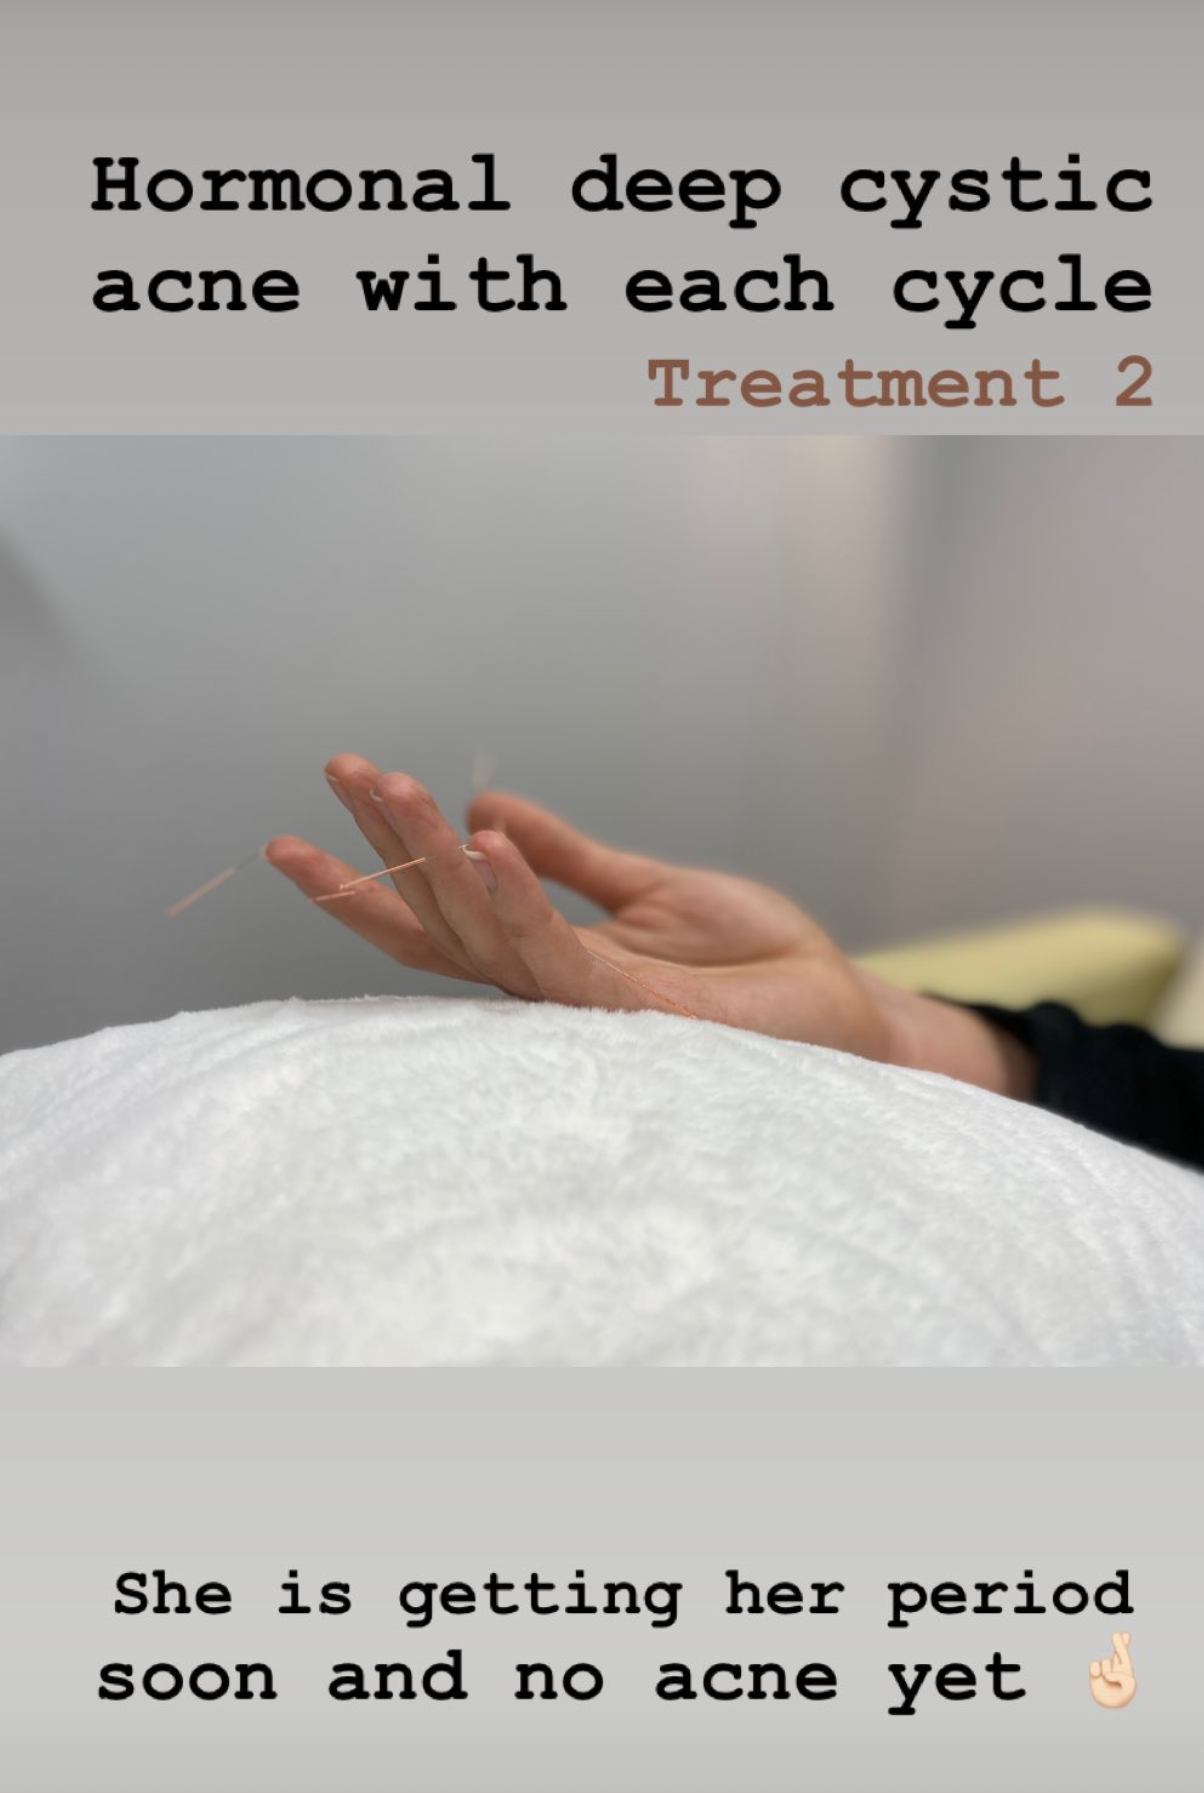  SuJok Acupuncture in Vancouver used to treat patients for Hormonal Balancing. Patient was treated for cystic acne appearing on each menstrual cycle. Treatments have resulted in elimination of acne outbreak. 